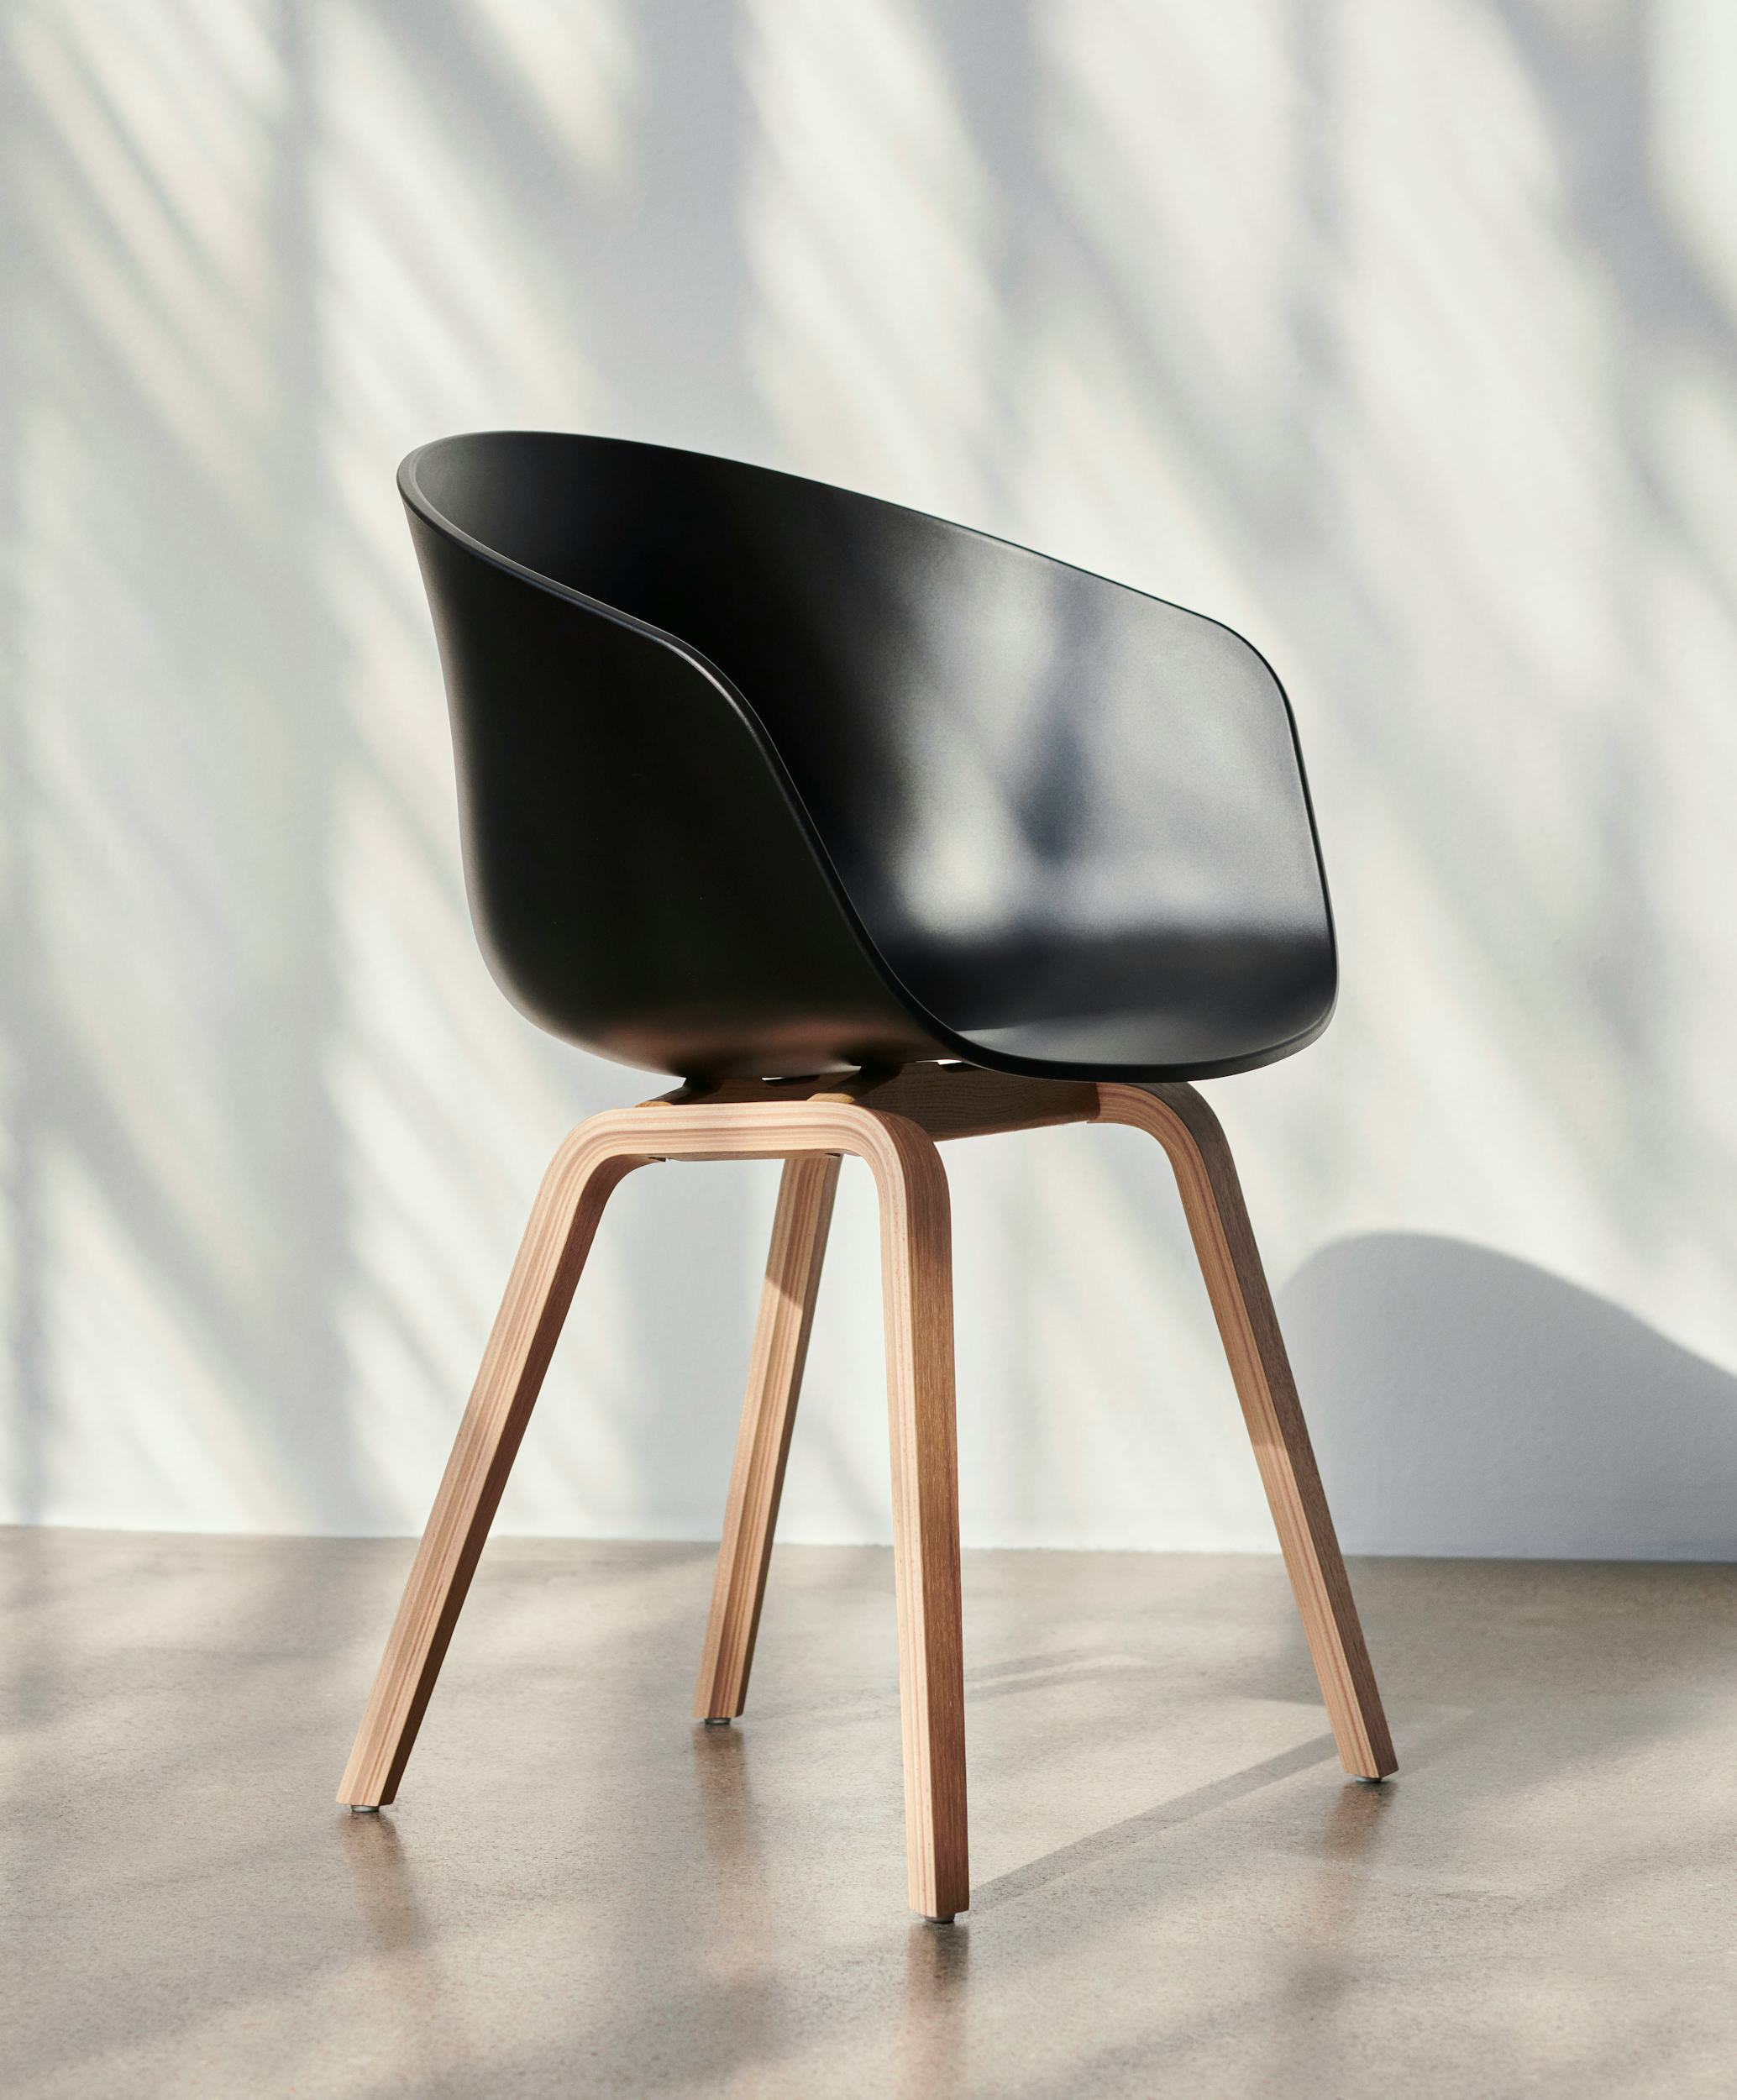 About A Chair 50 Task Chair 2.0 – HAY